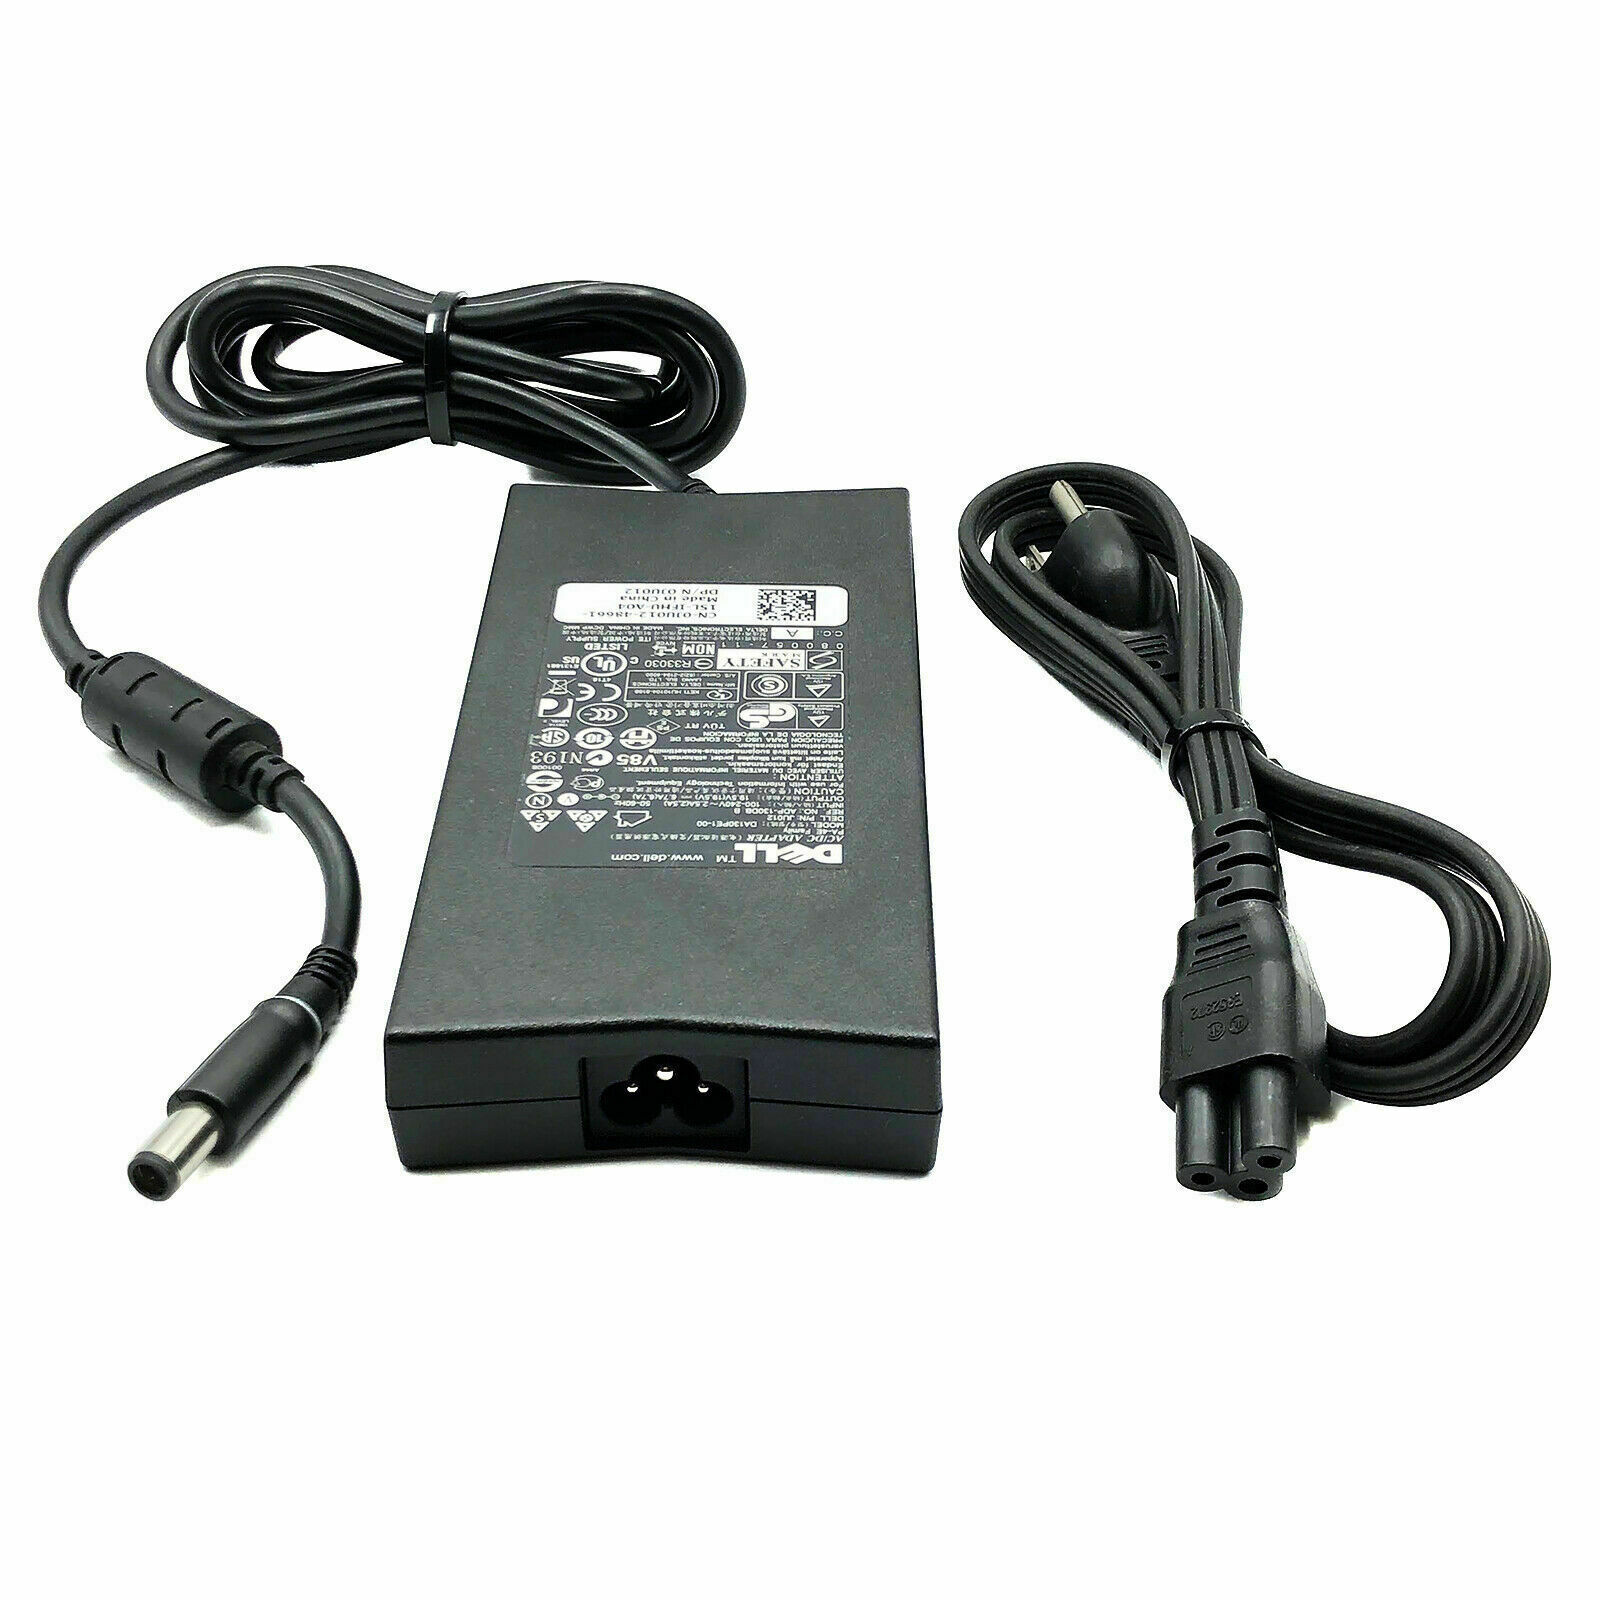 Genuine Dell Adapter Power Supply for Docking Station D6000 WD15 K17A with cord